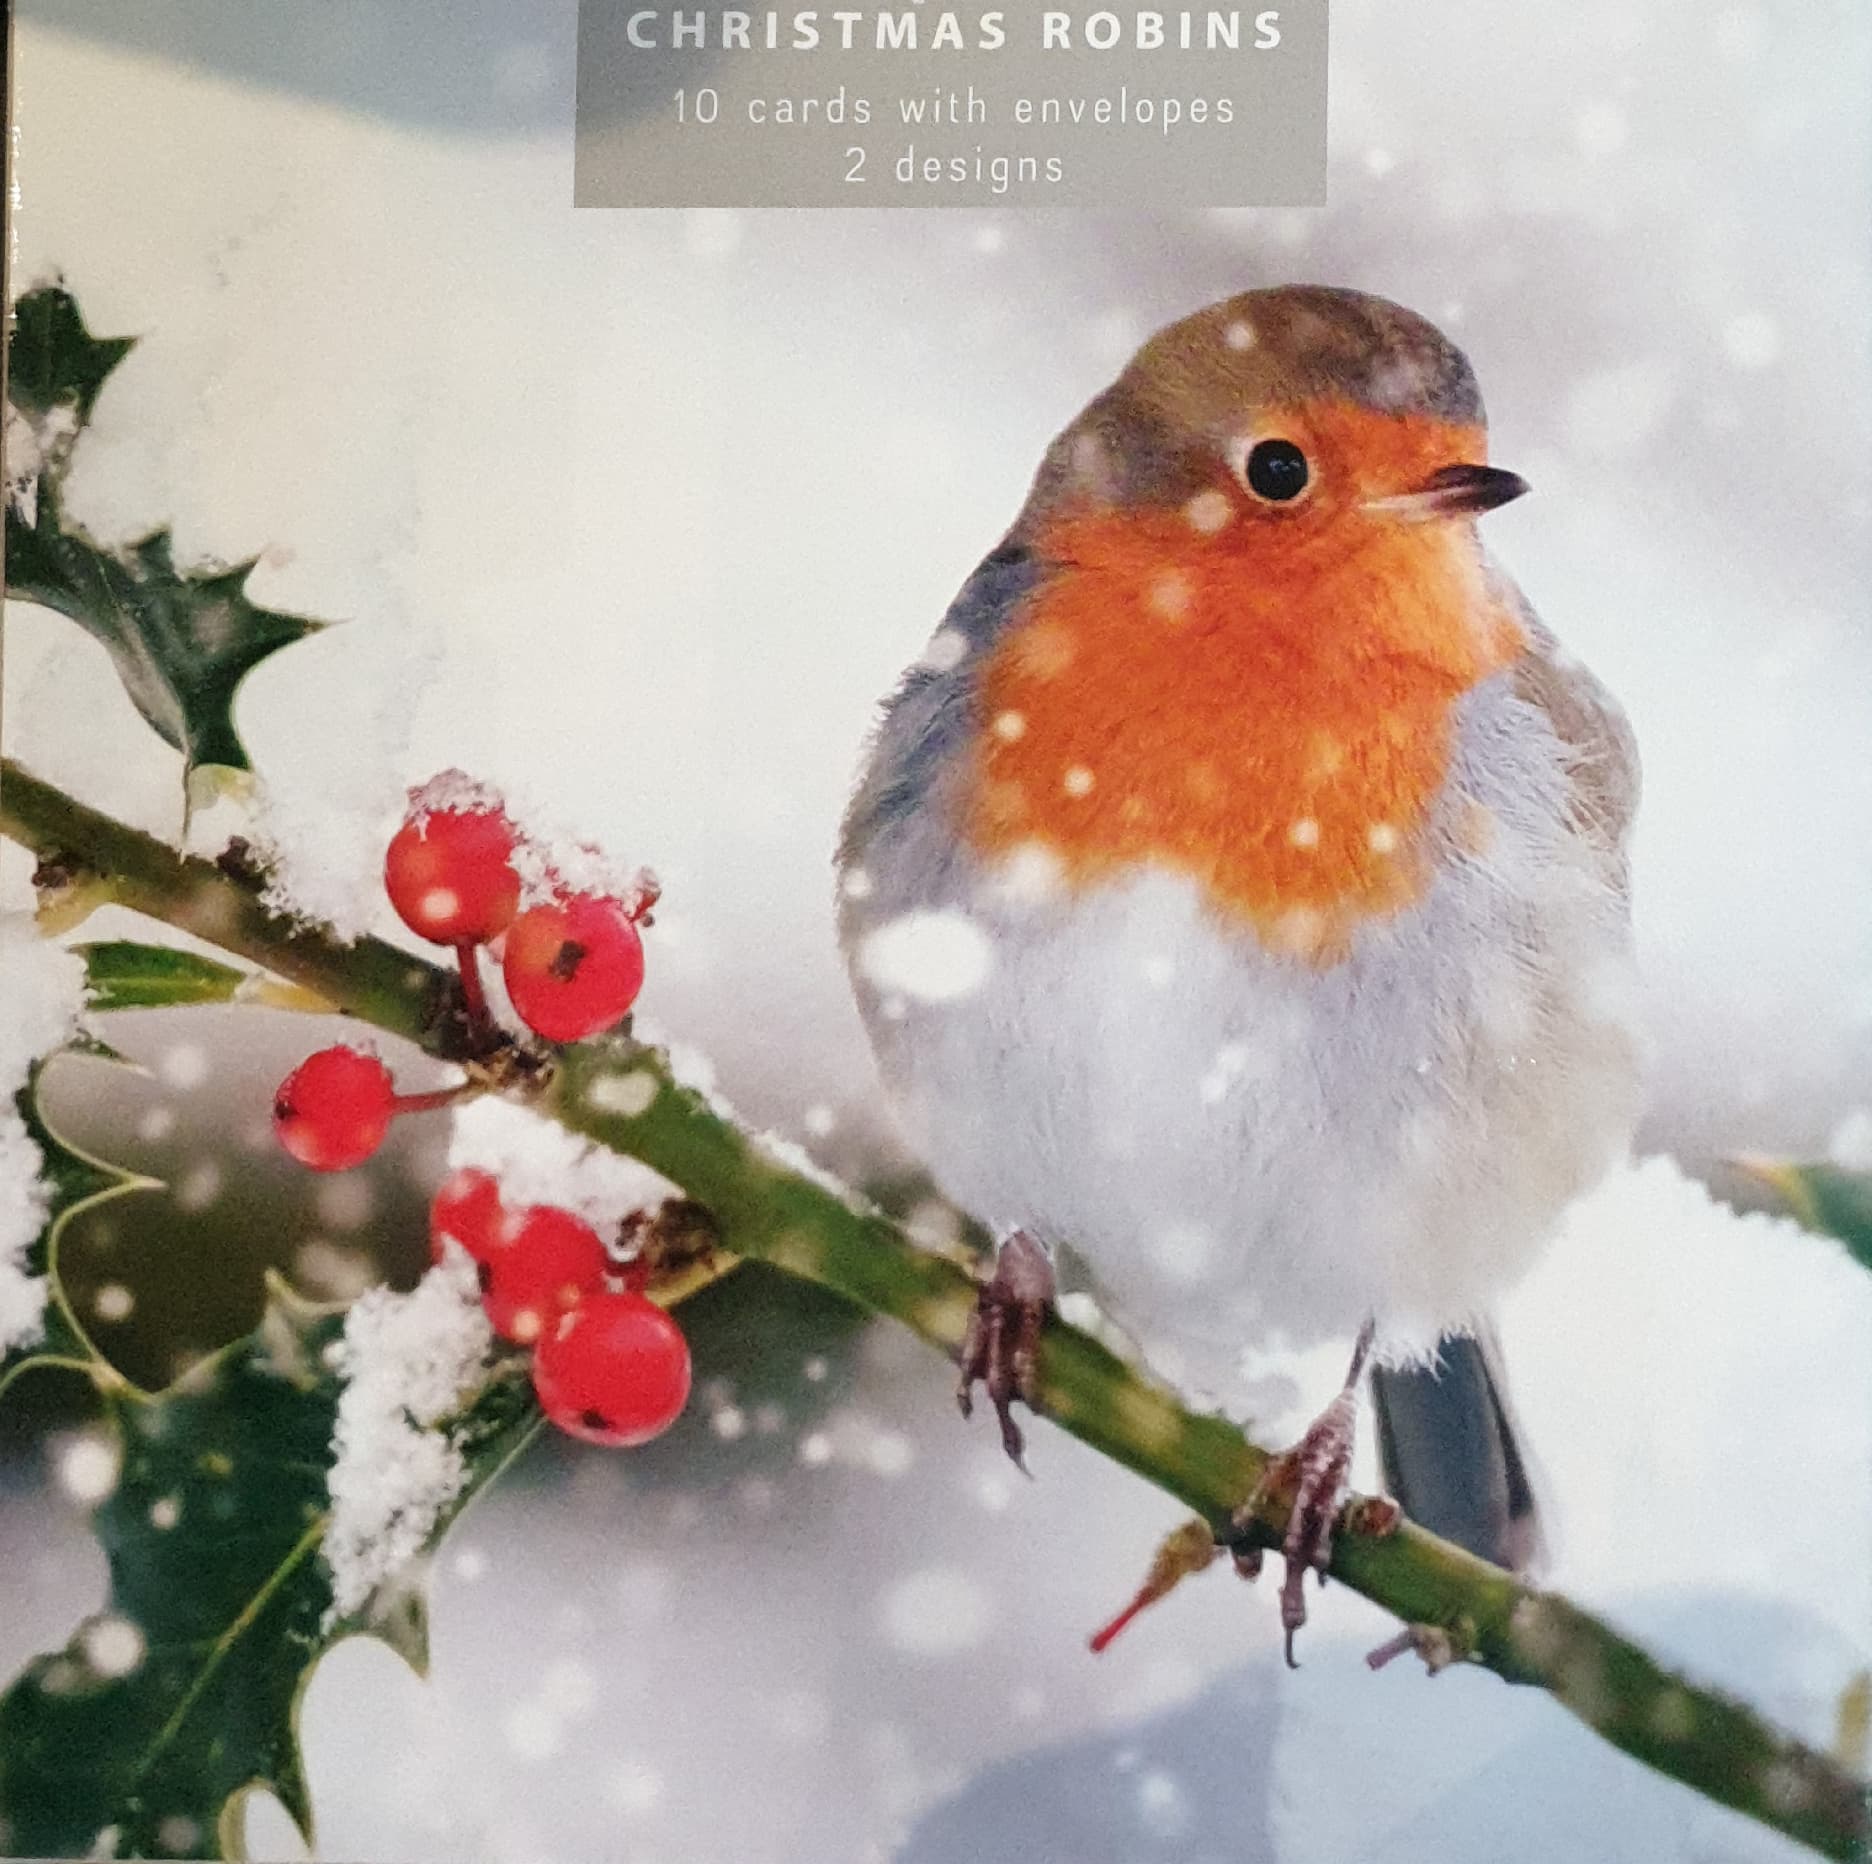 Charity Christmas Cards - 10 Cards with Envelopes / 2 Designs - Bird in the Snow